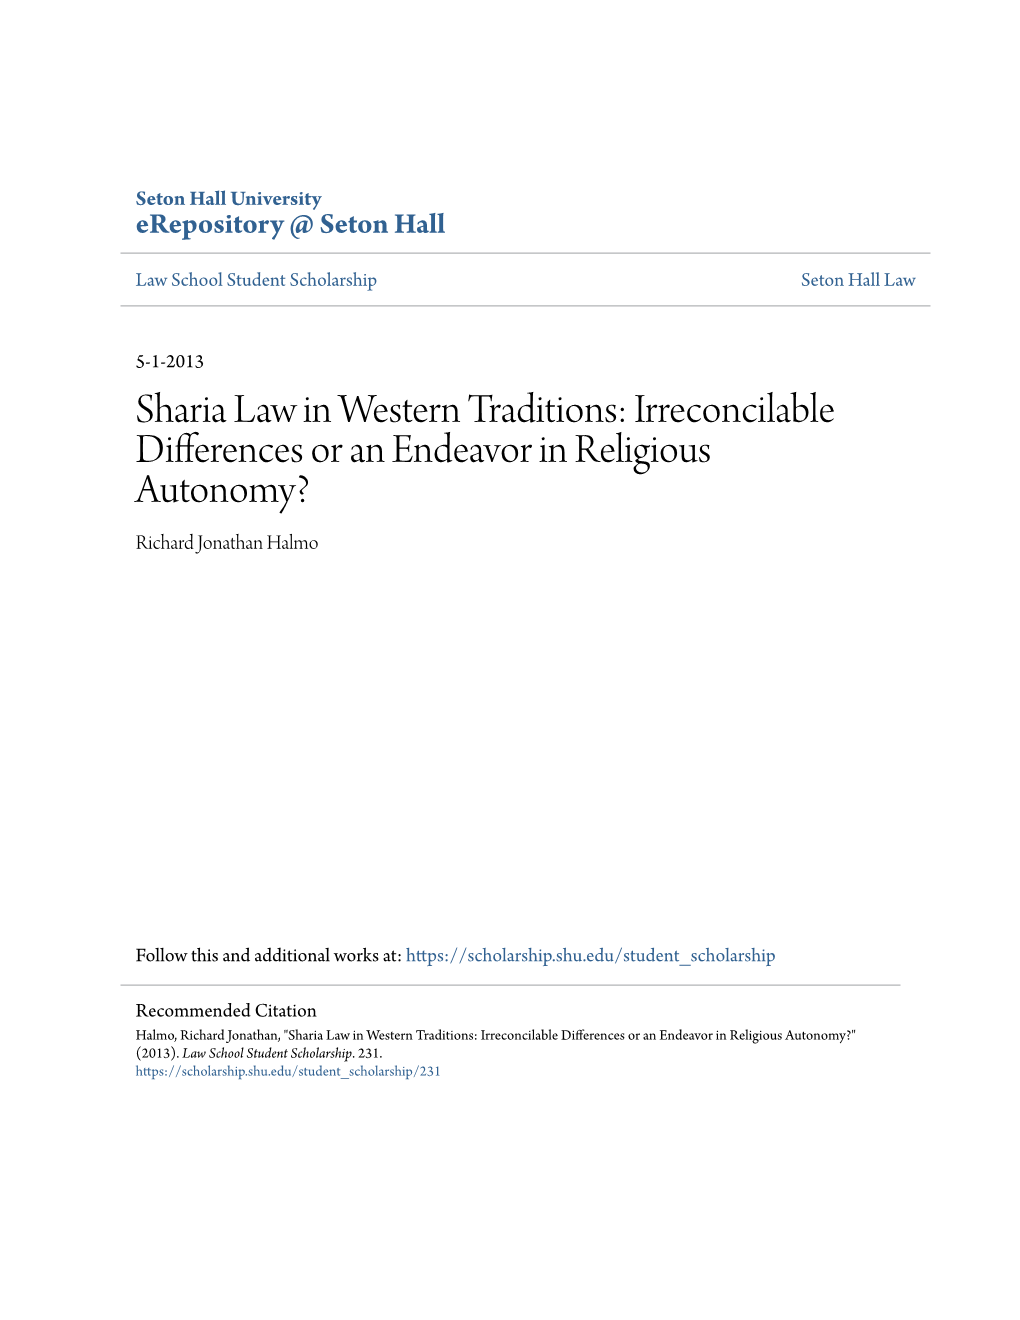 Sharia Law in Western Traditions: Irreconcilable Differences Or an Endeavor in Religious Autonomy? Richard Jonathan Halmo